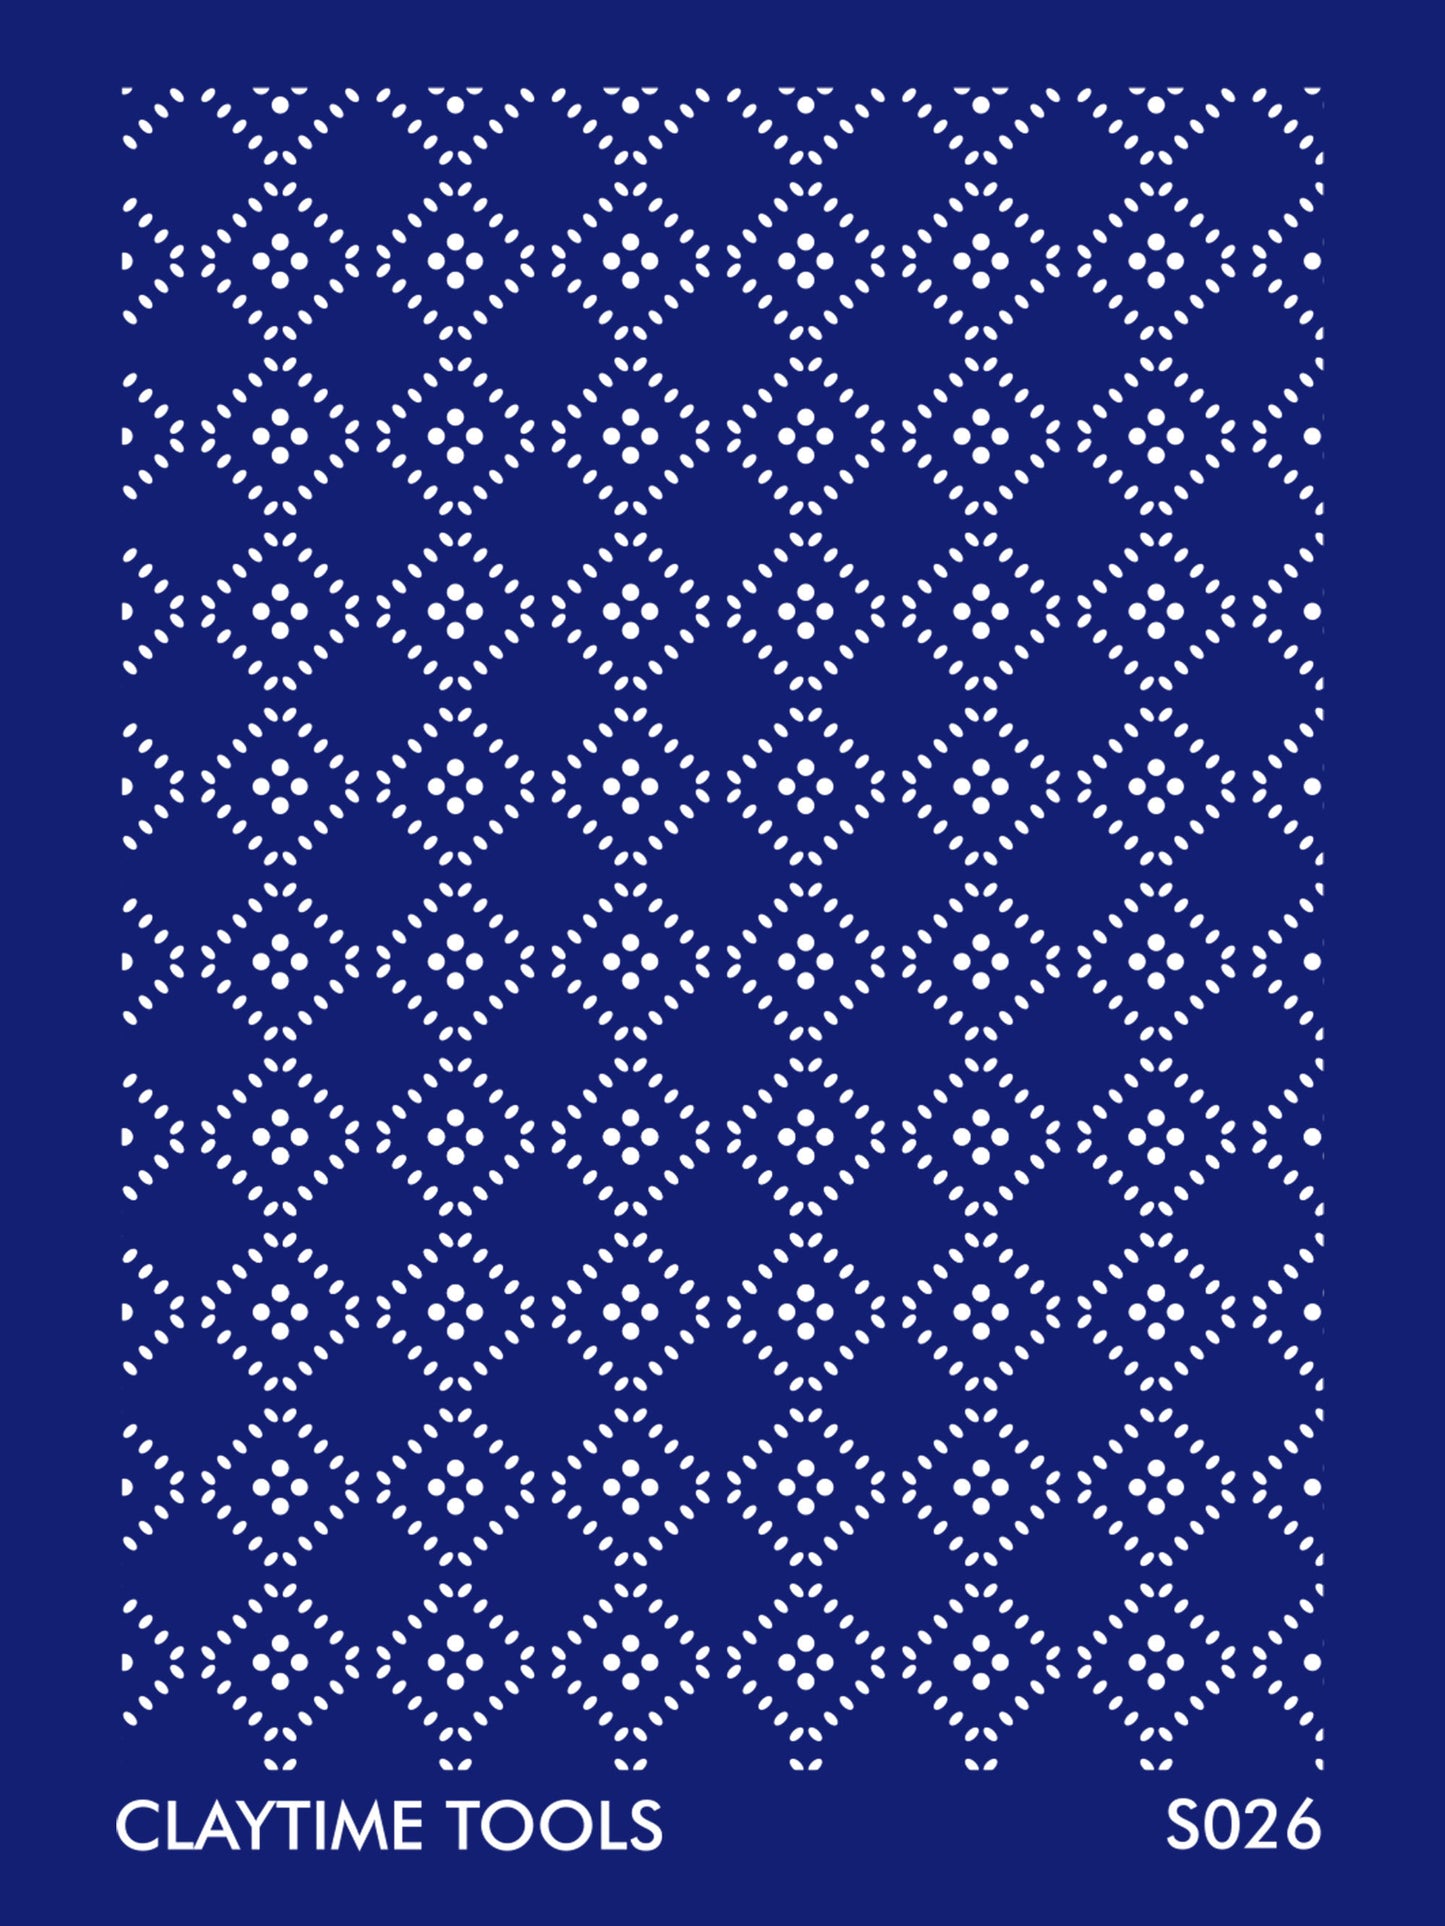 Rhombus with dots in a blue background.